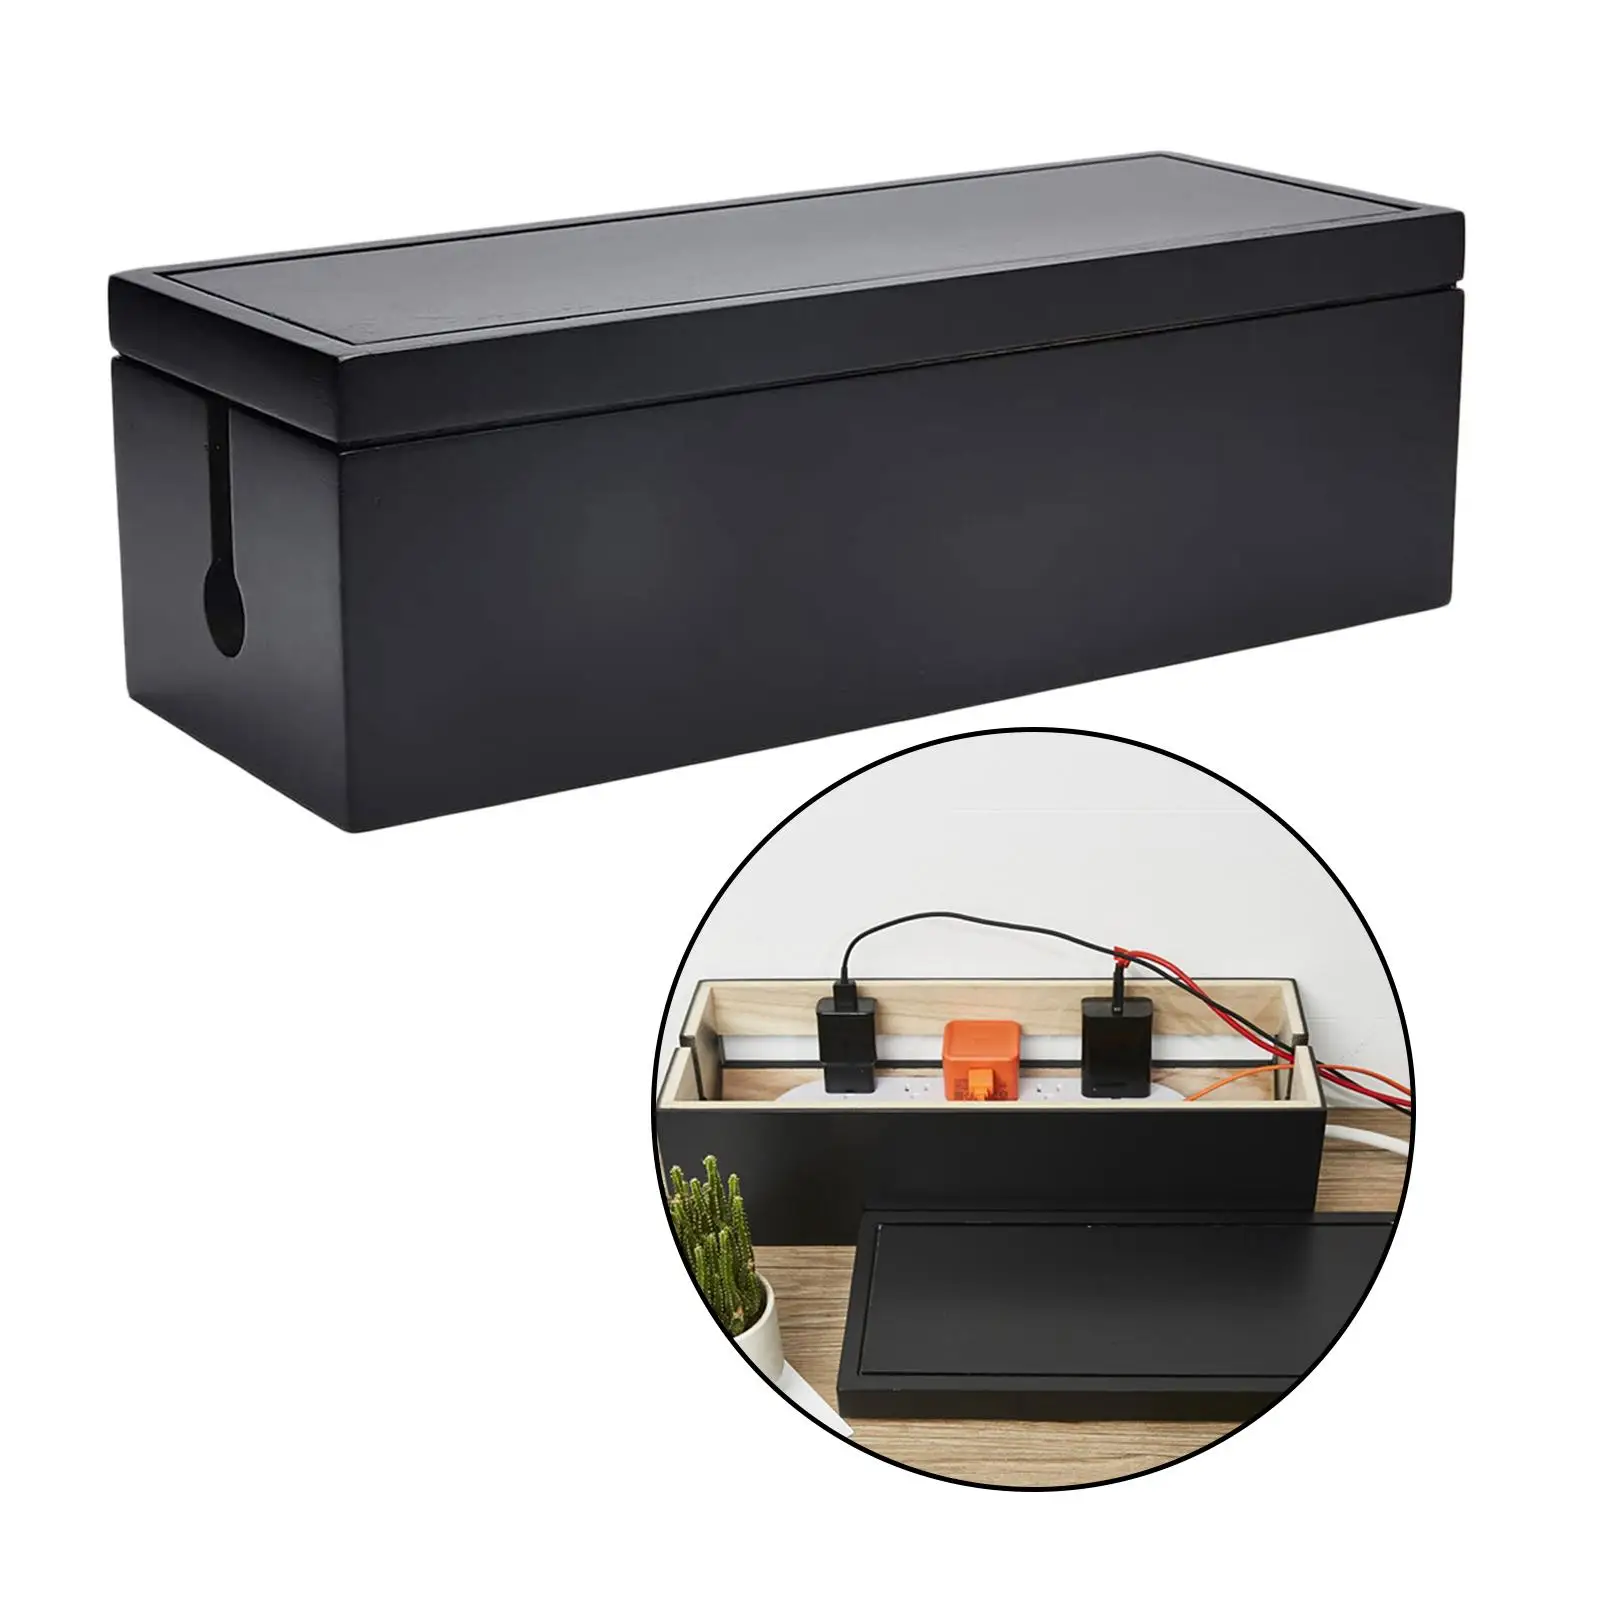 Cable Management Box, Hide and Conceal  and Electrical Cords from TVs, Computers, and Desks Cord Organizer